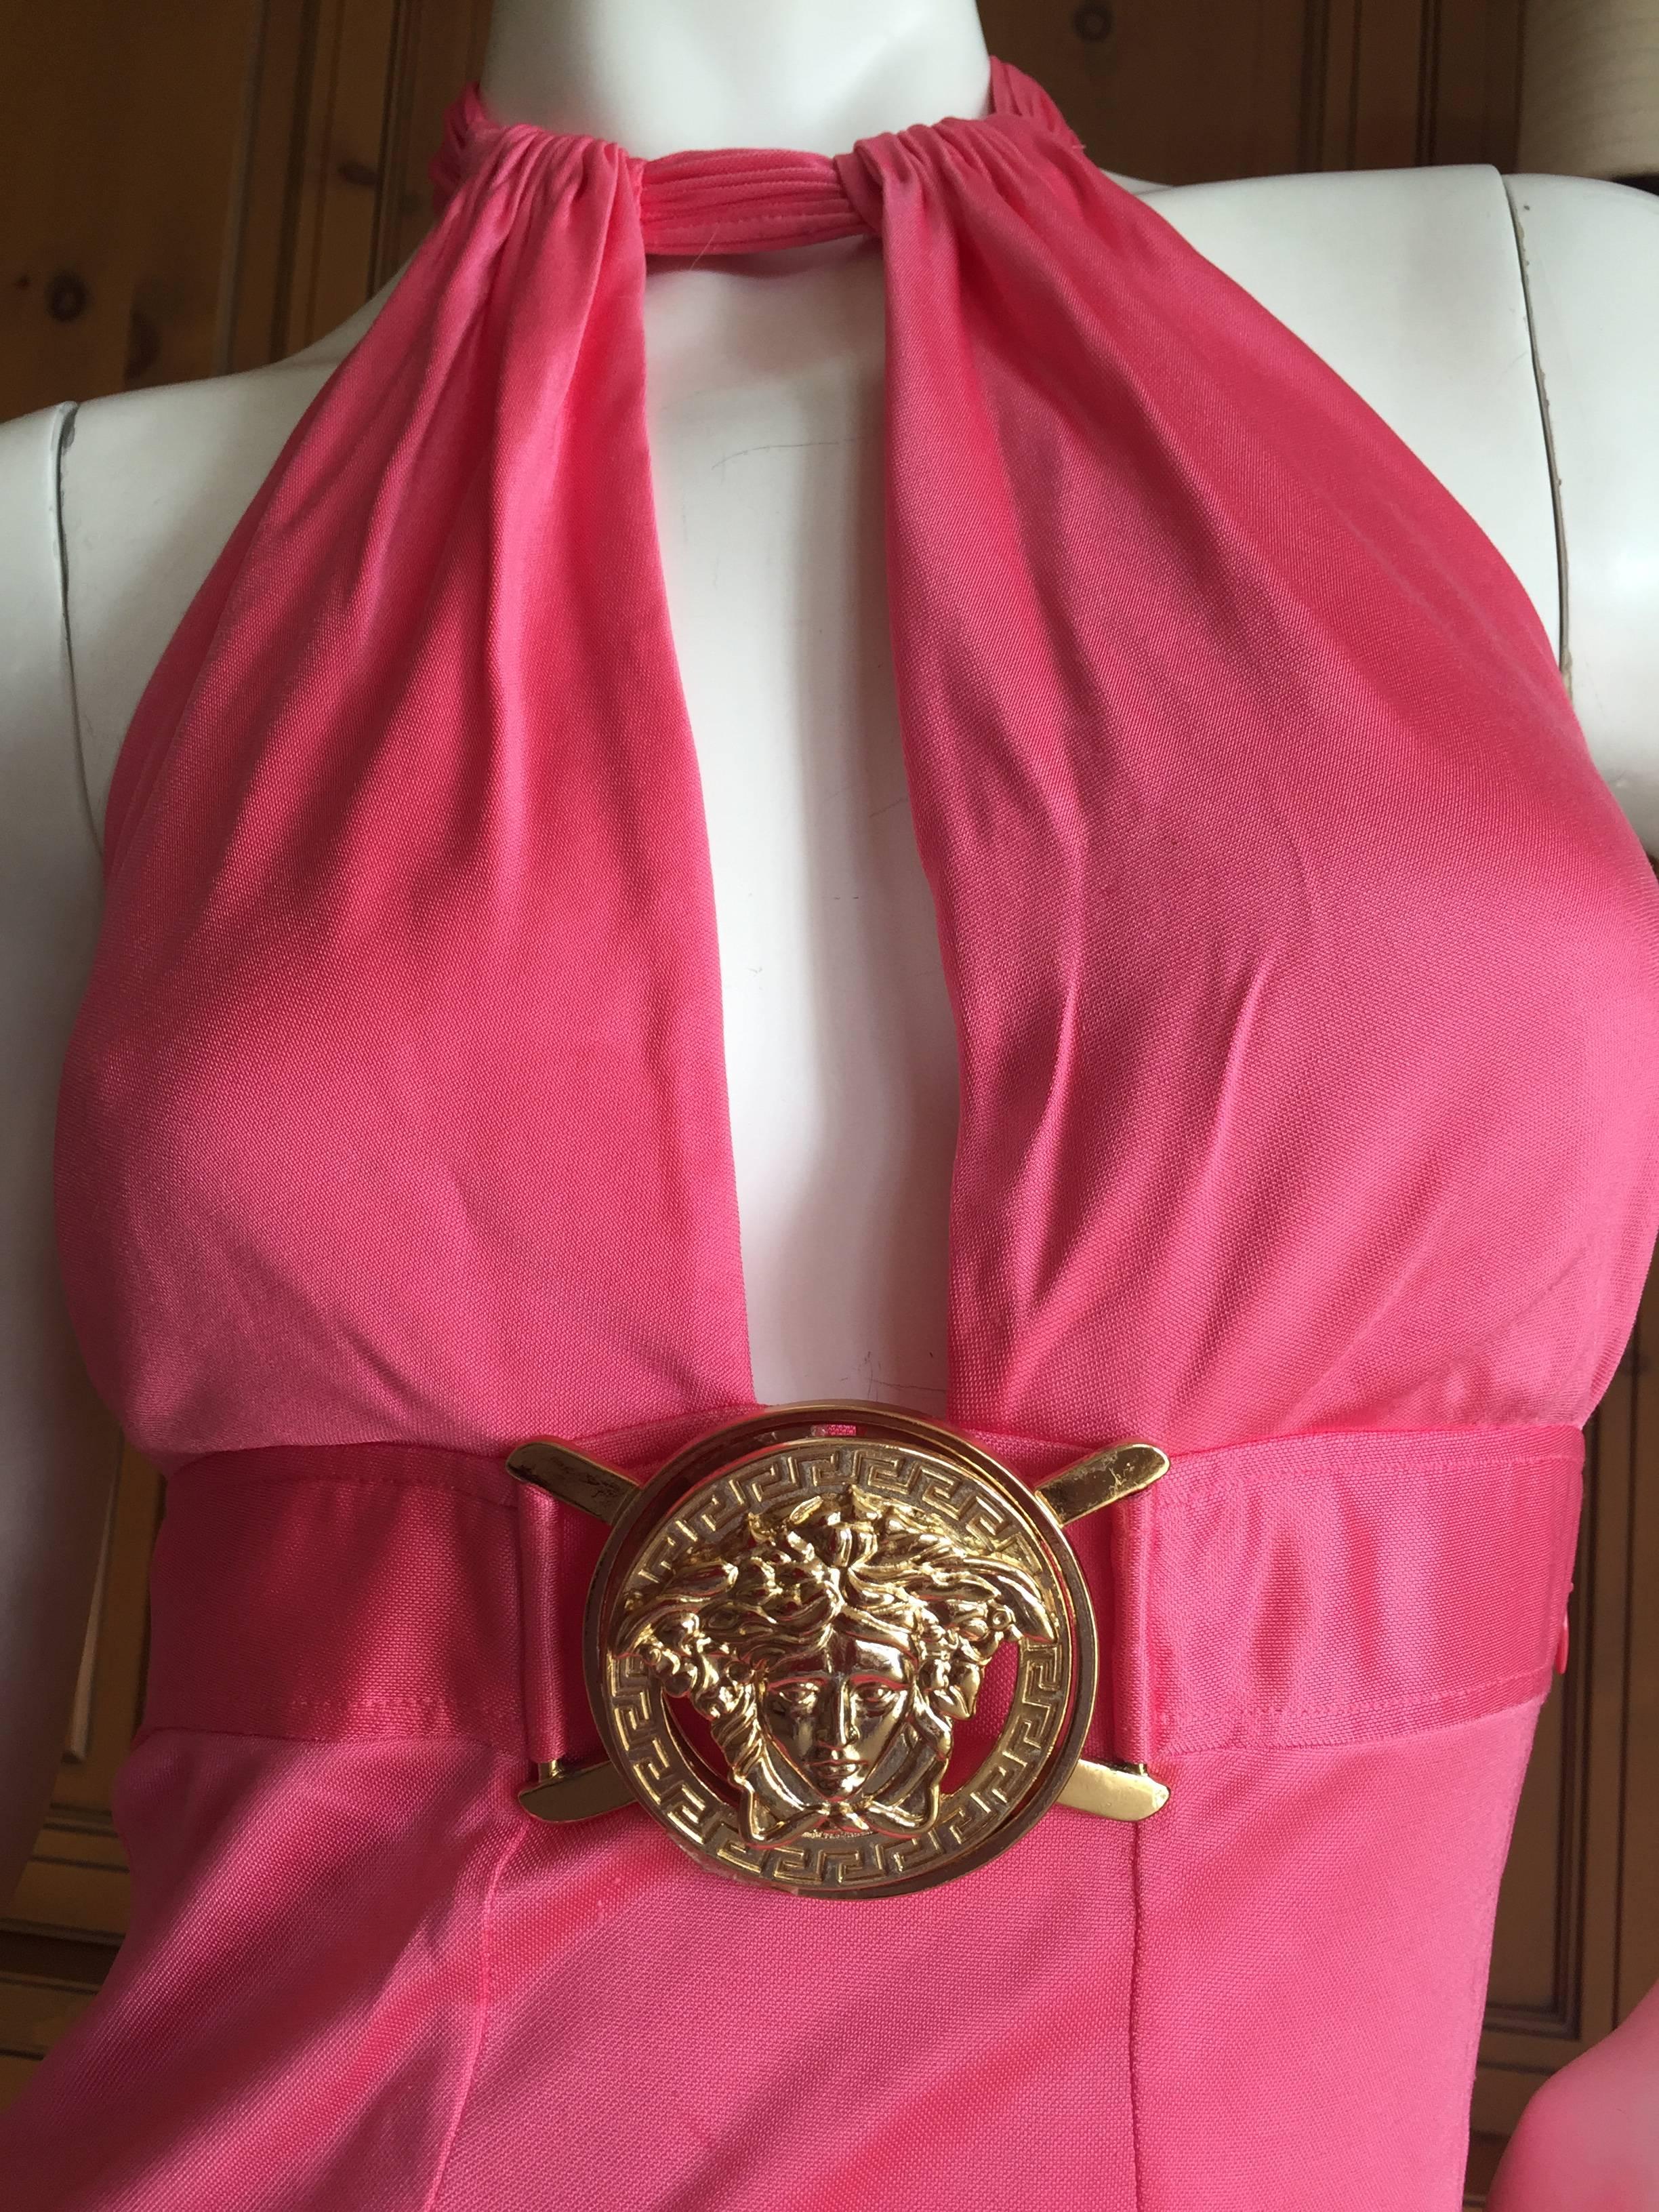 Versace Backless Pink Cocktail Dress with Large Gold Medusa Buckle.
So sexy, made of soft jersey, it ties in the back, and the belt is only onrnamental.
Unworn.
Size 42
Bust 36